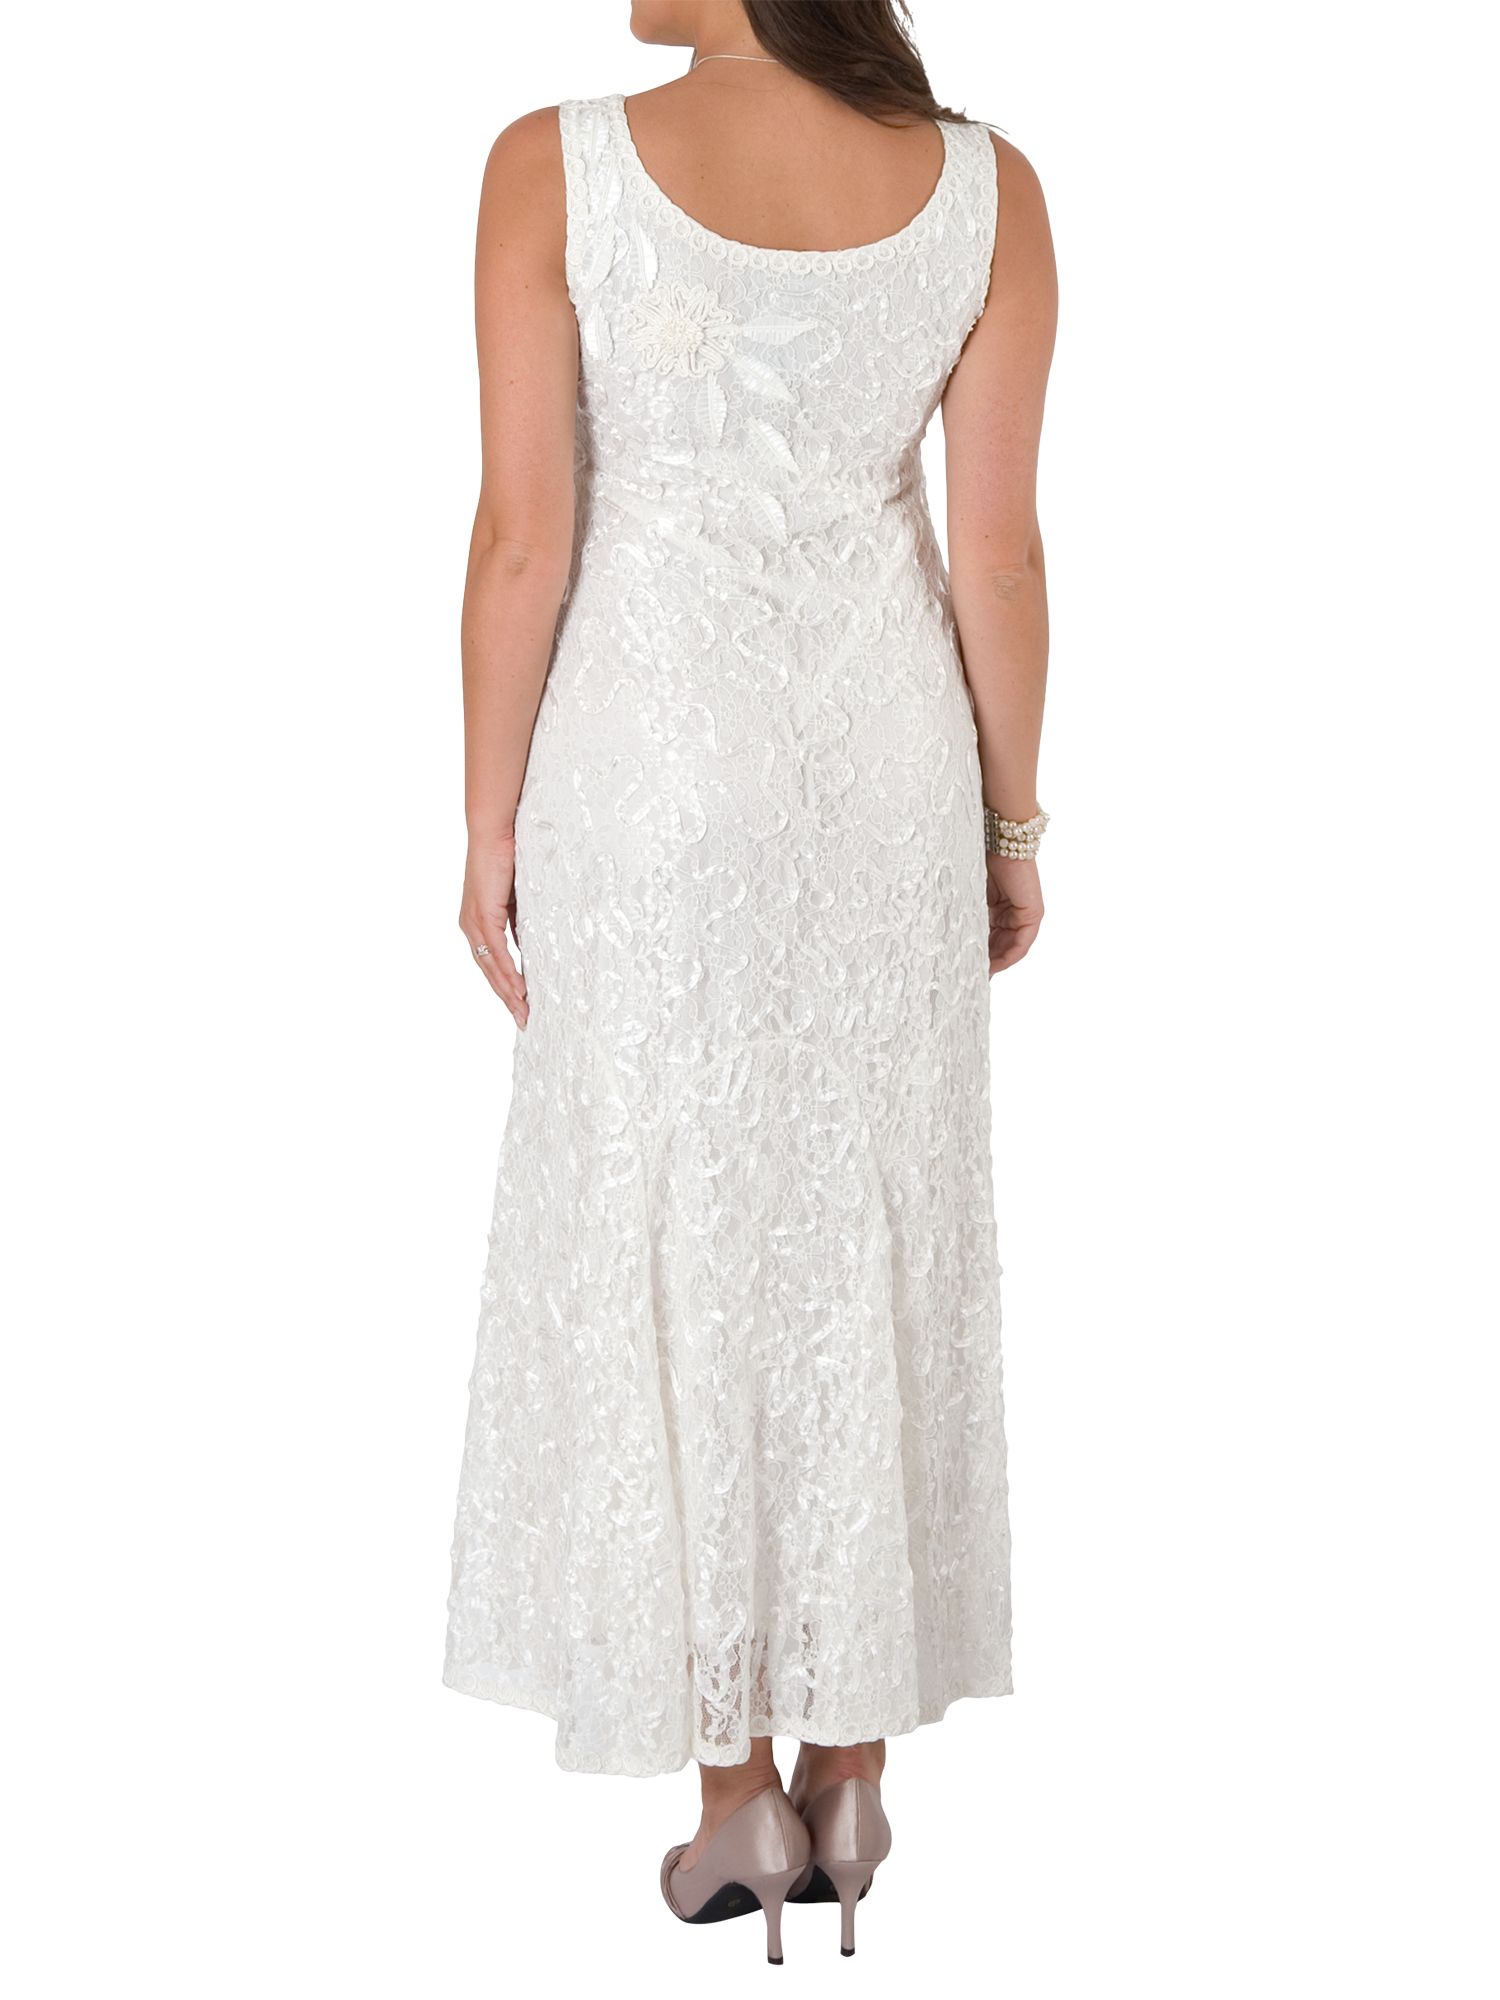 Chesca Lace Cornelli Embroidered Dress, Ivory at John Lewis & Partners